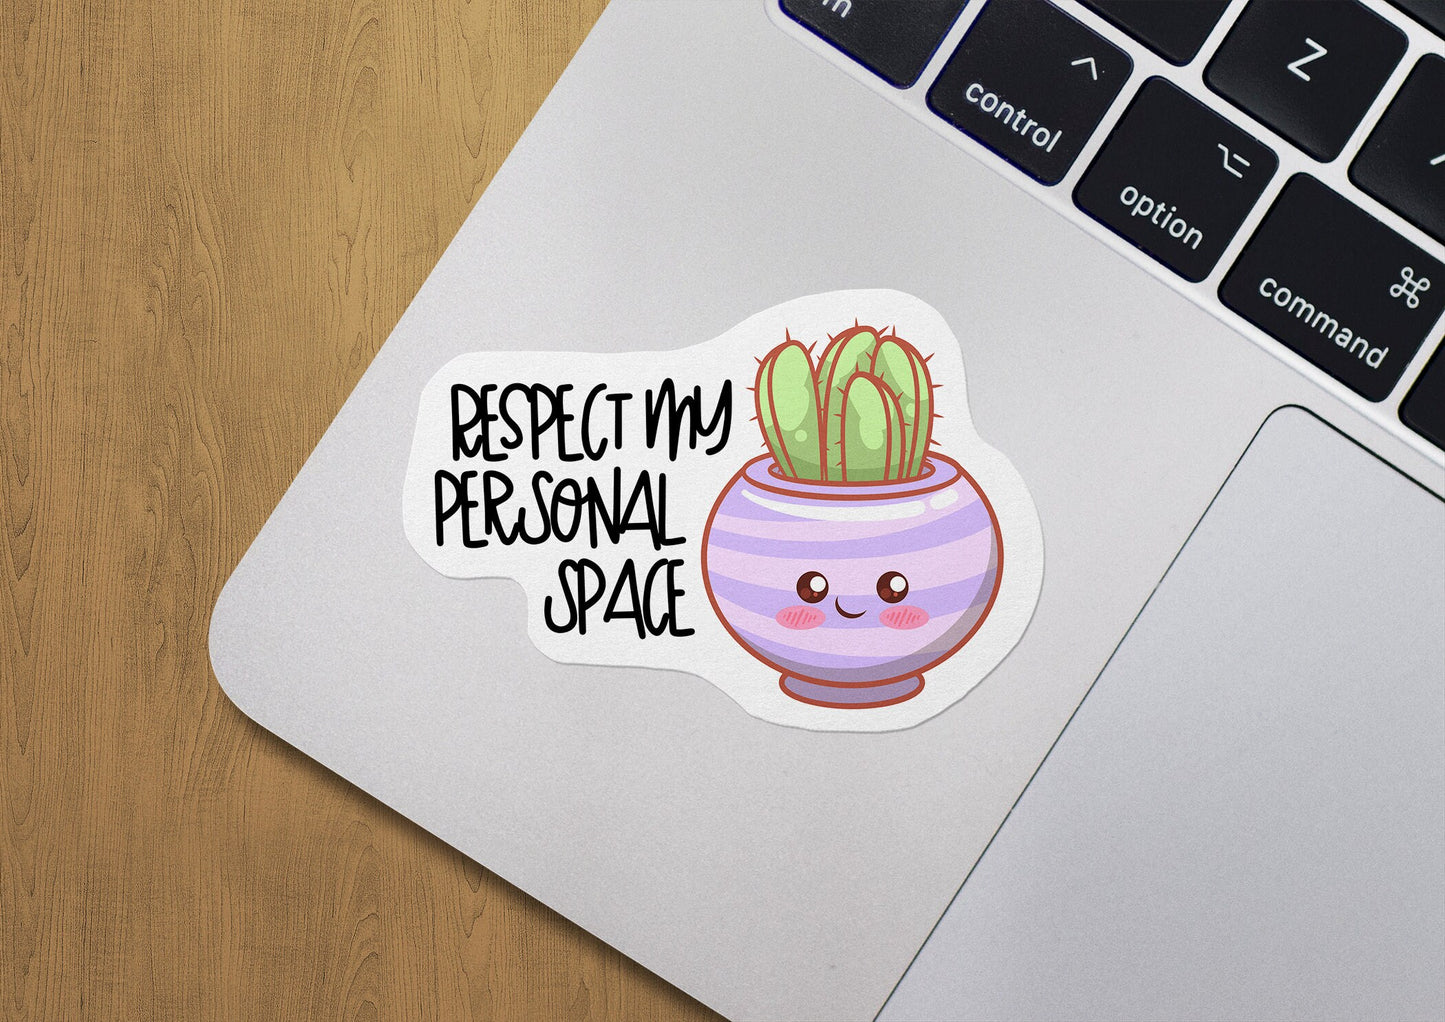 Respect My Personal Space Sticker, Social Distance Bubble Tiktok Quote Decal, Popular Now Best Selling Macbook Water Bottle